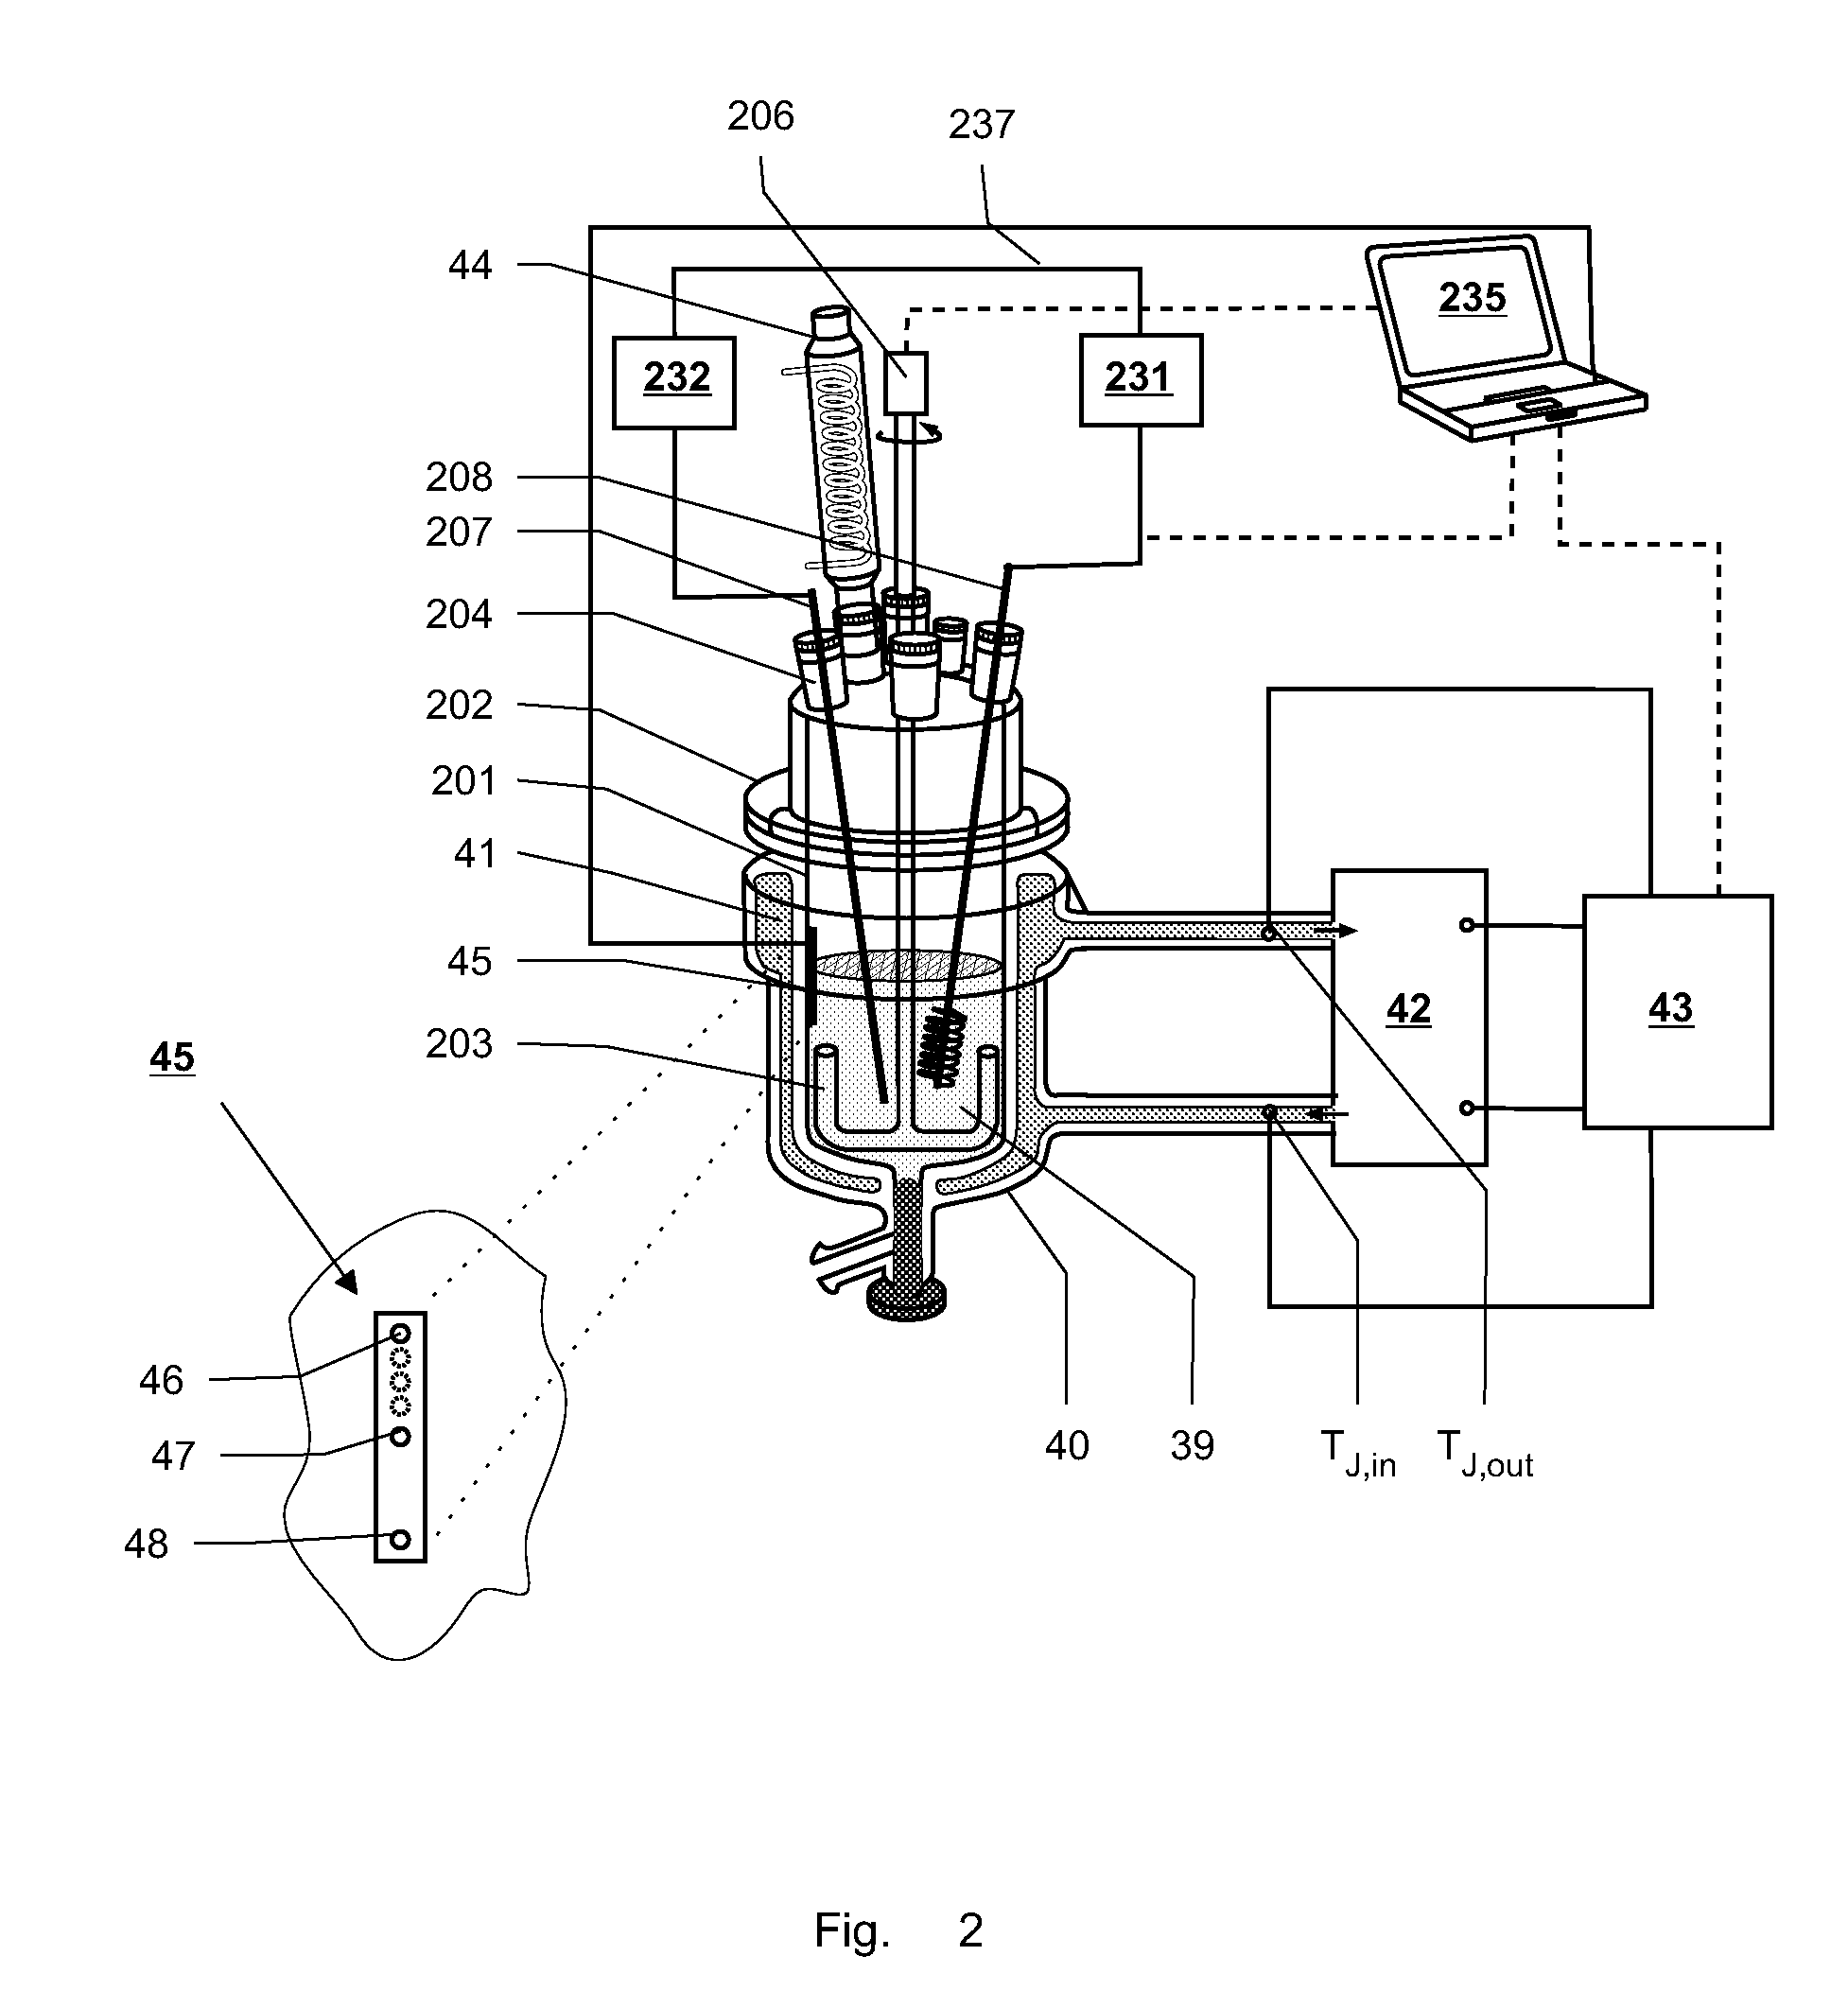 Method and device for determining specific heat capacity